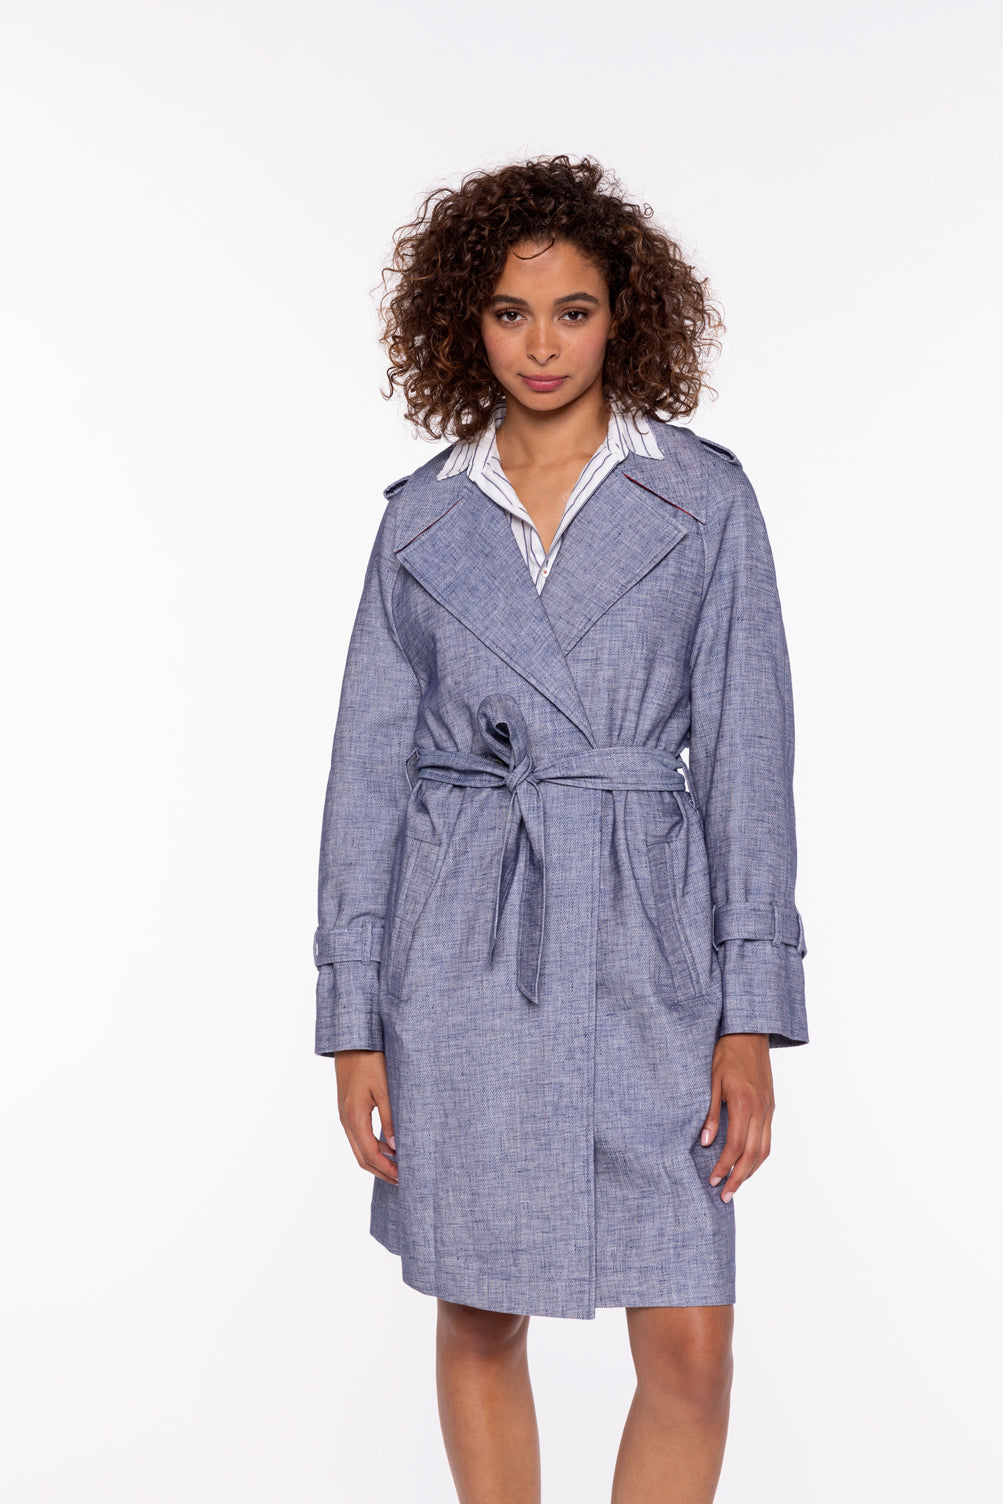 FOURAS Trench-Oversized belted trench in denim-style cotton and linen